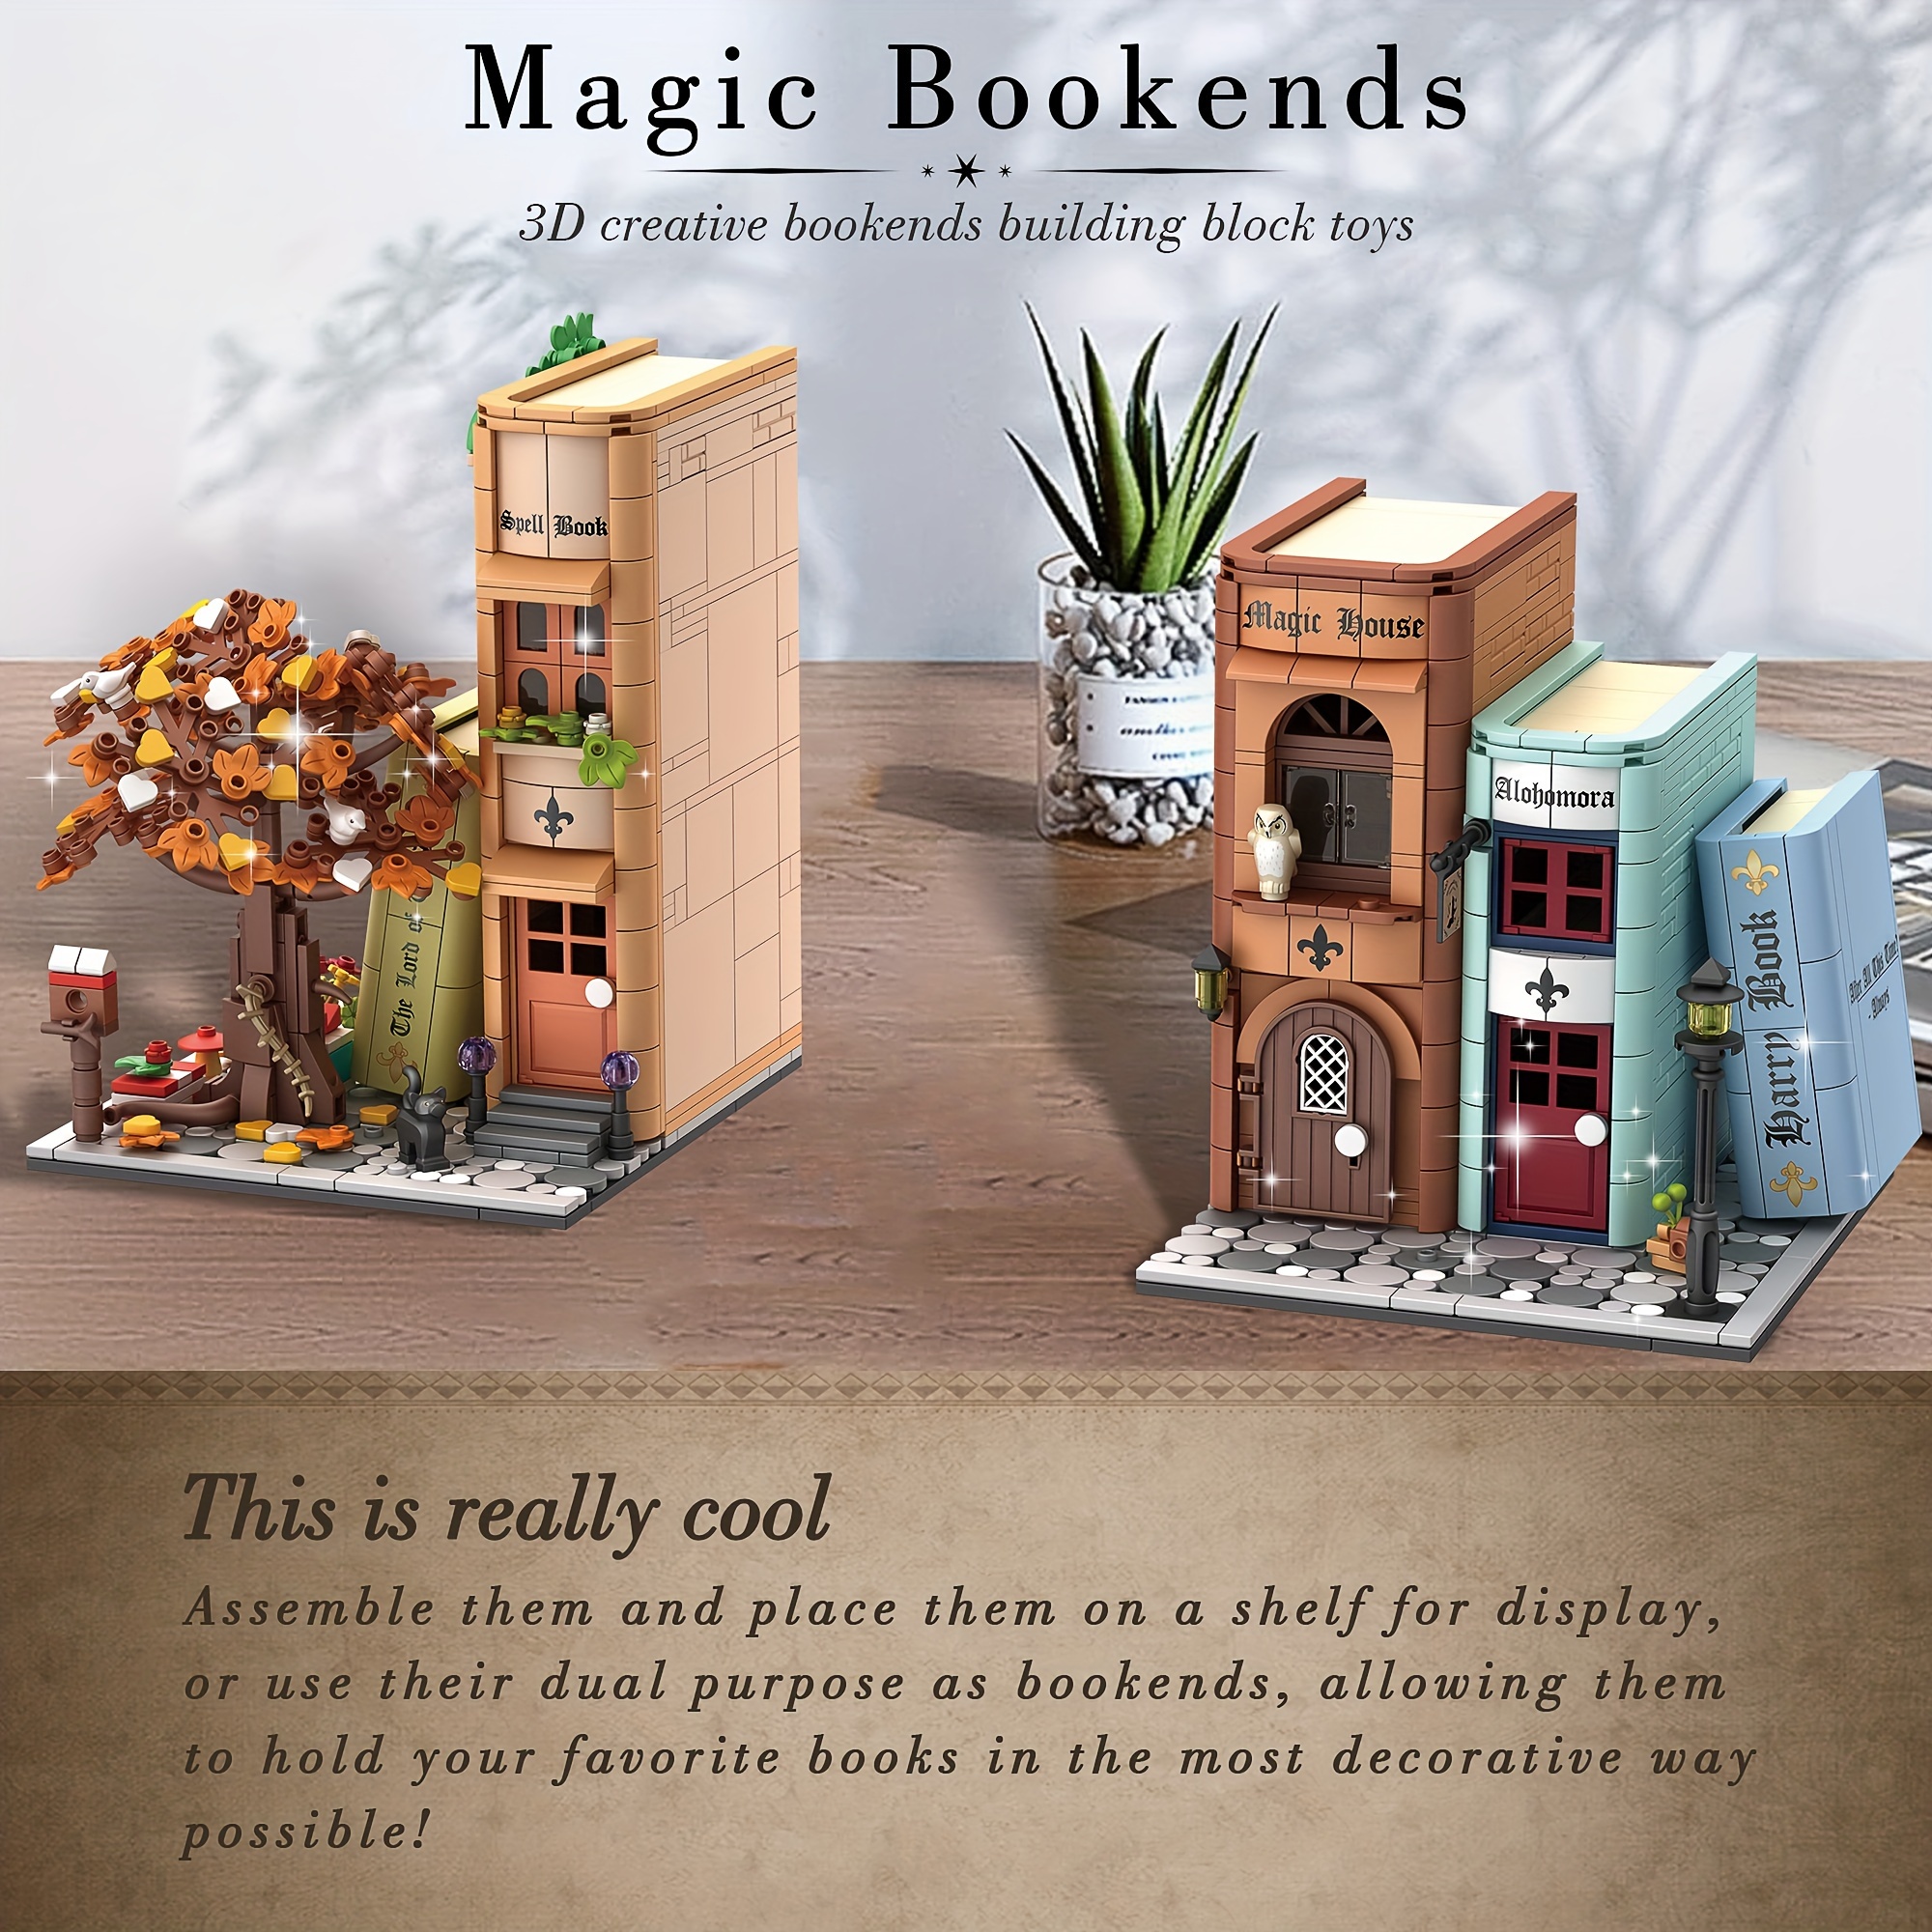 Bookend Magic House Building Kit , Home Decorative Bookends For Building  Block Toy, Cool Bookshelf Organizer And Home Decor,for Adult Collector 1488p